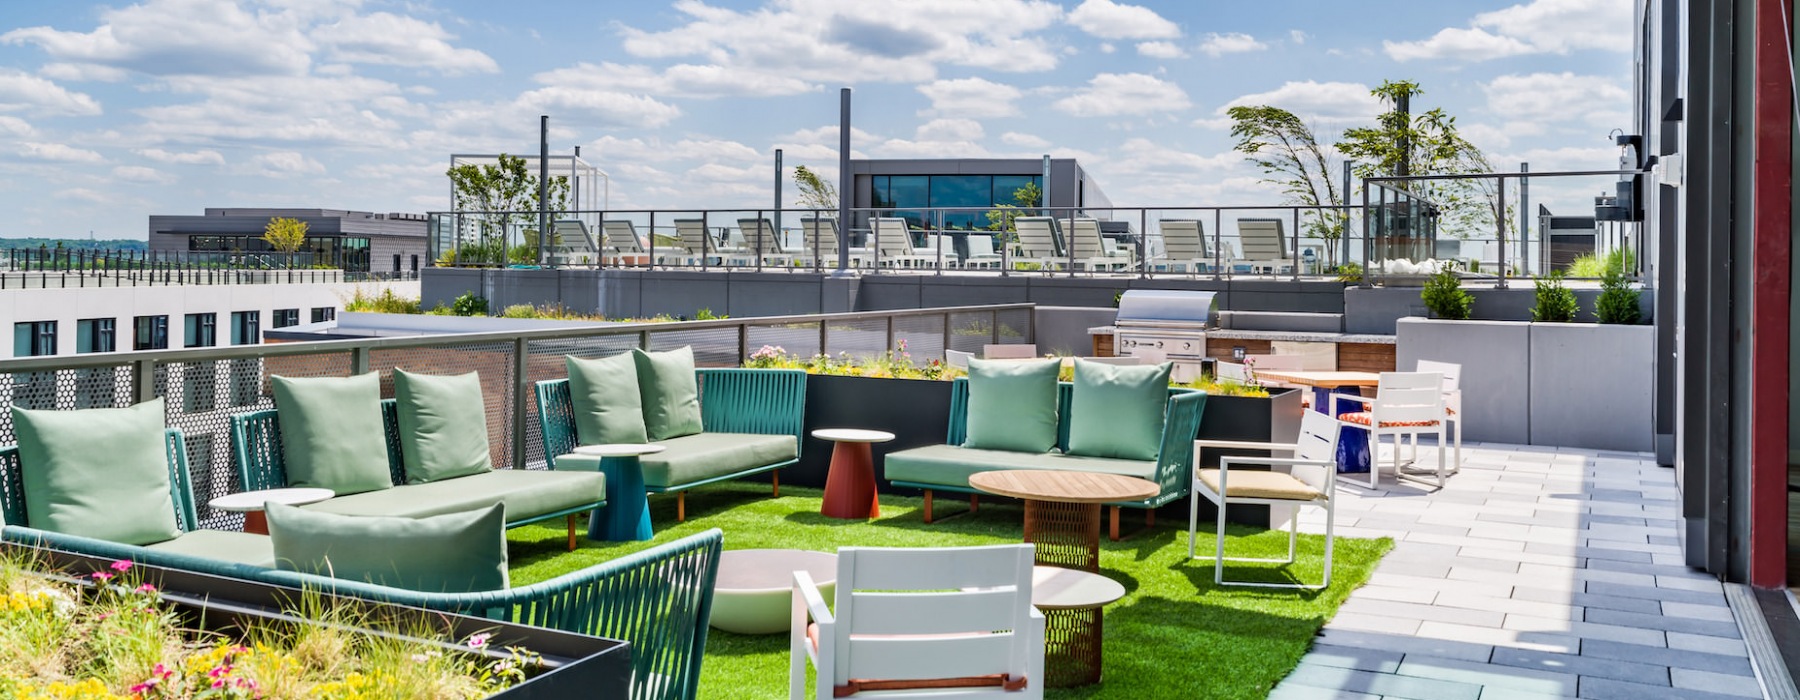 rooftop lounge with comfortable vibrant seating 